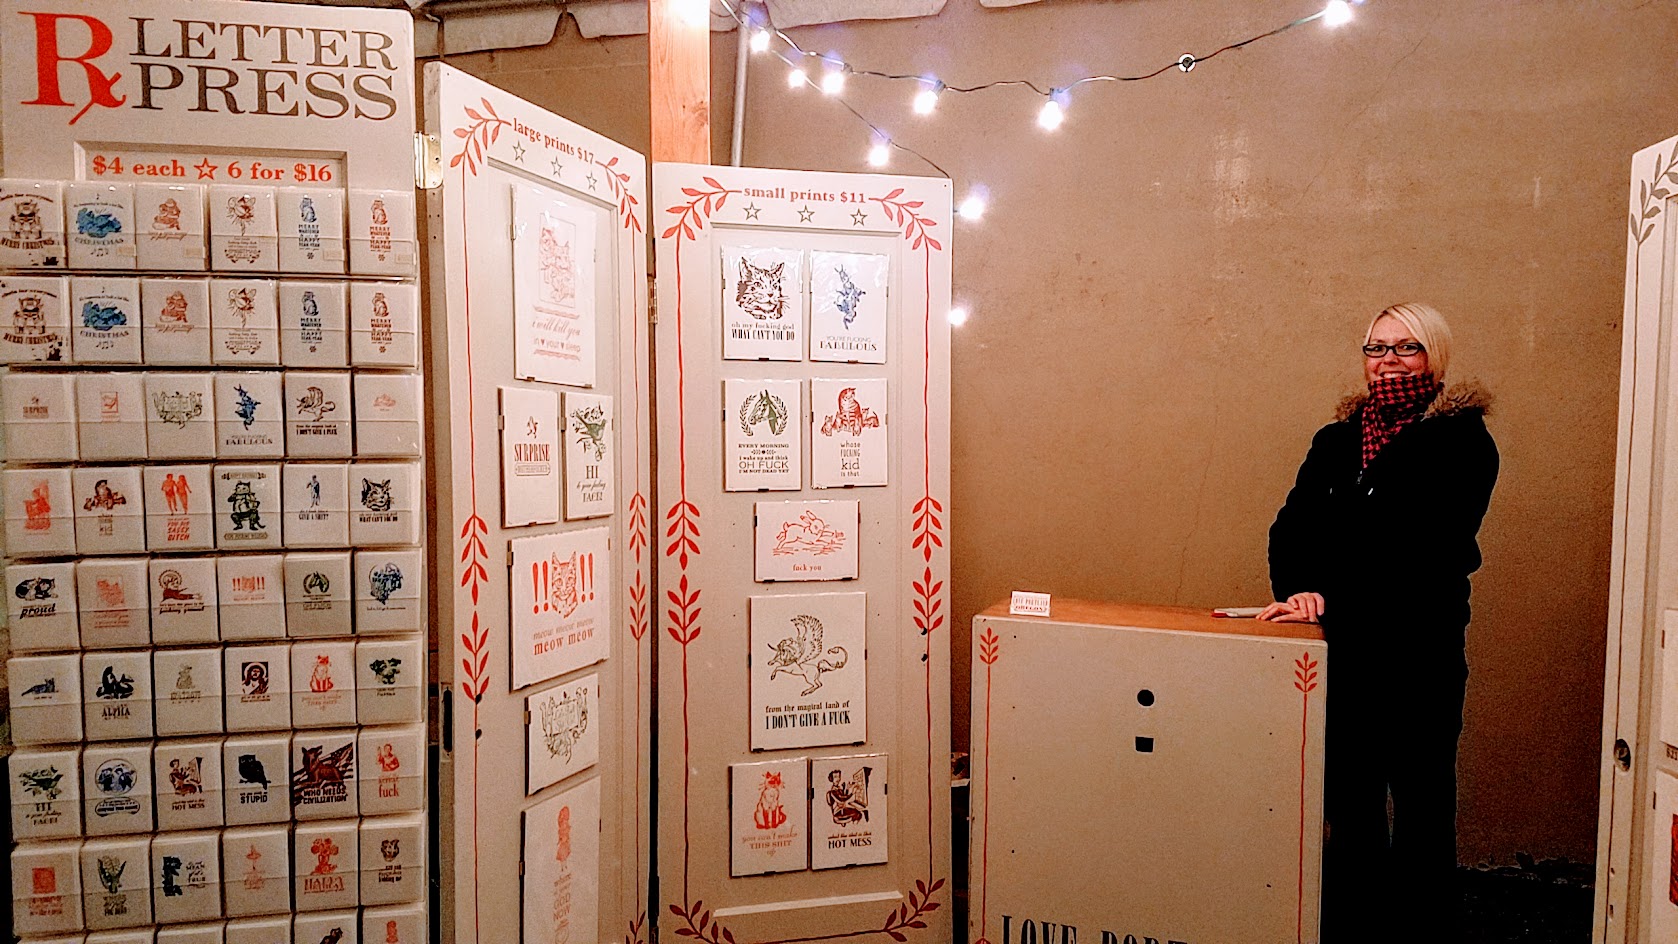 Rx Letterpress the Portland Night Market, held every few months in the Central Industrial District in a warehouse, during the November 2016 market